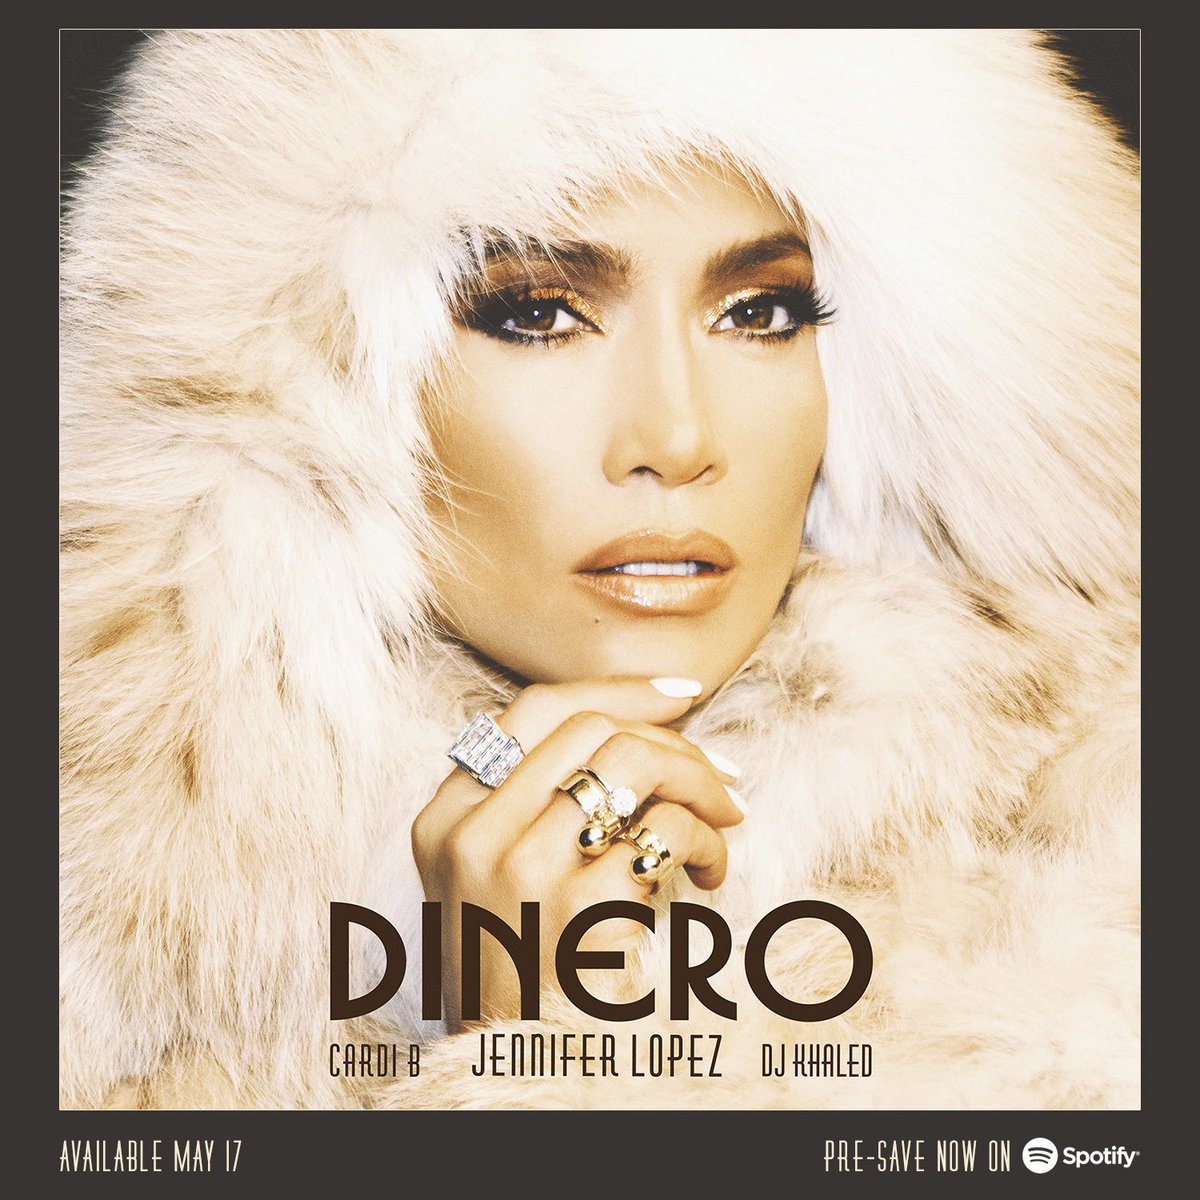 #DINERO ft. #CardiB and @djkhaled pre-save on @Spotify NOW! 
https://t.co/sO5LjjH5xq https://t.co/F1sT3bSa5X